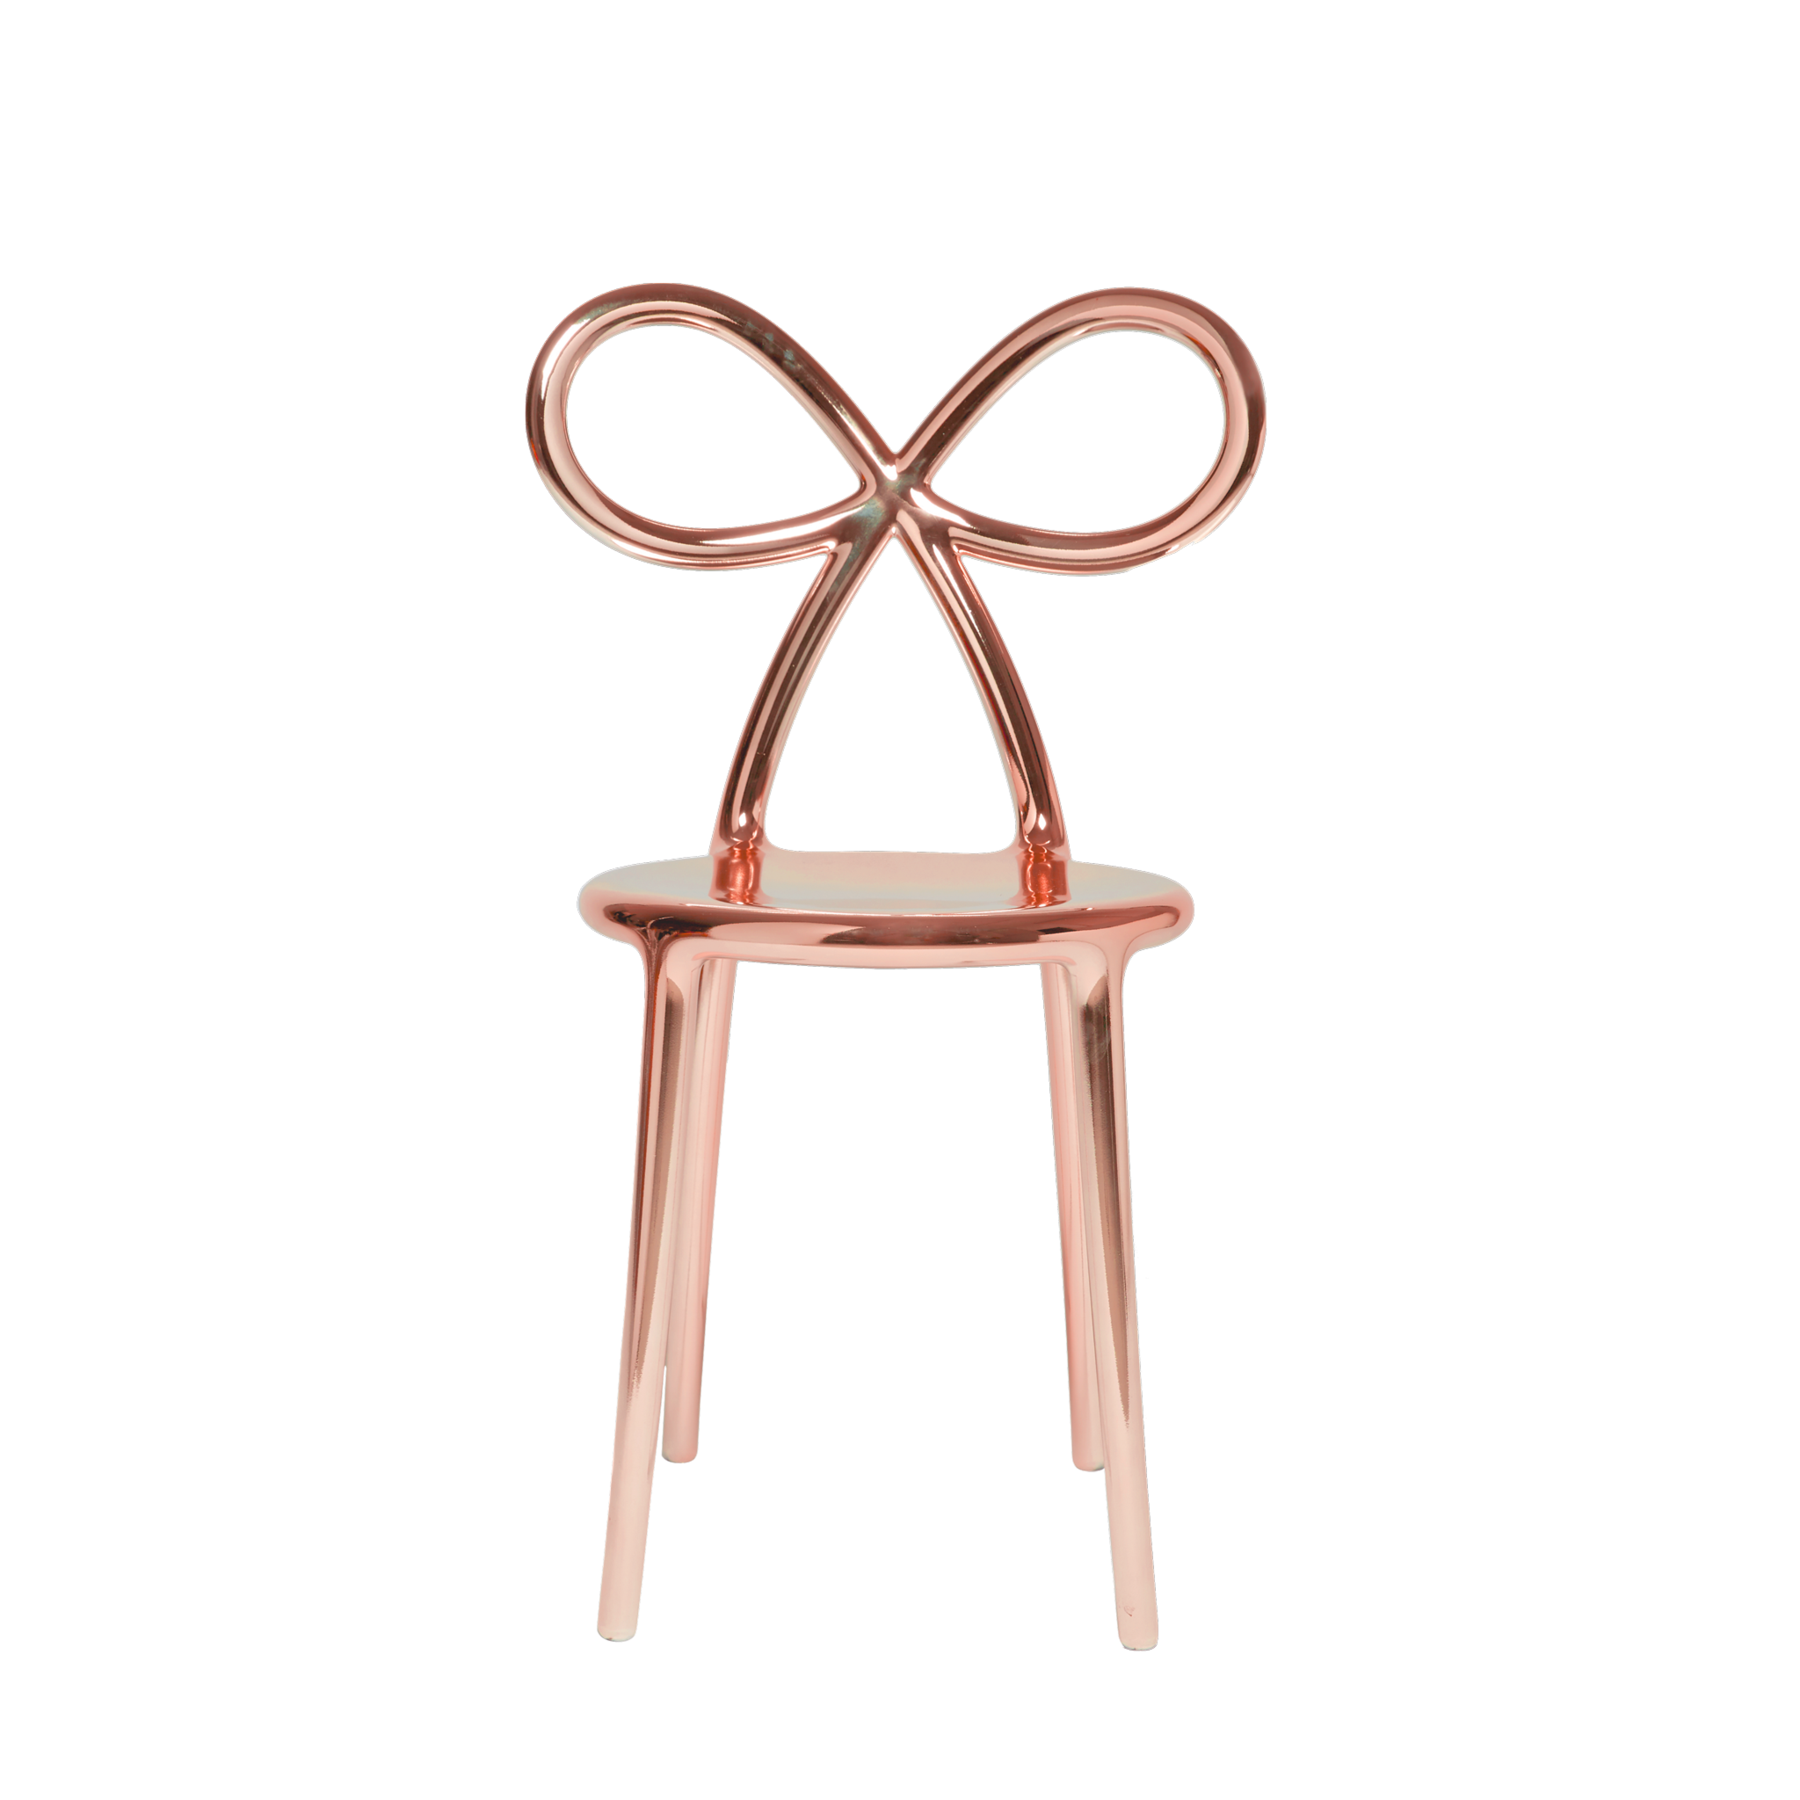 Qeeboo Ribbon Chair - Pink Gold CLEARANCE